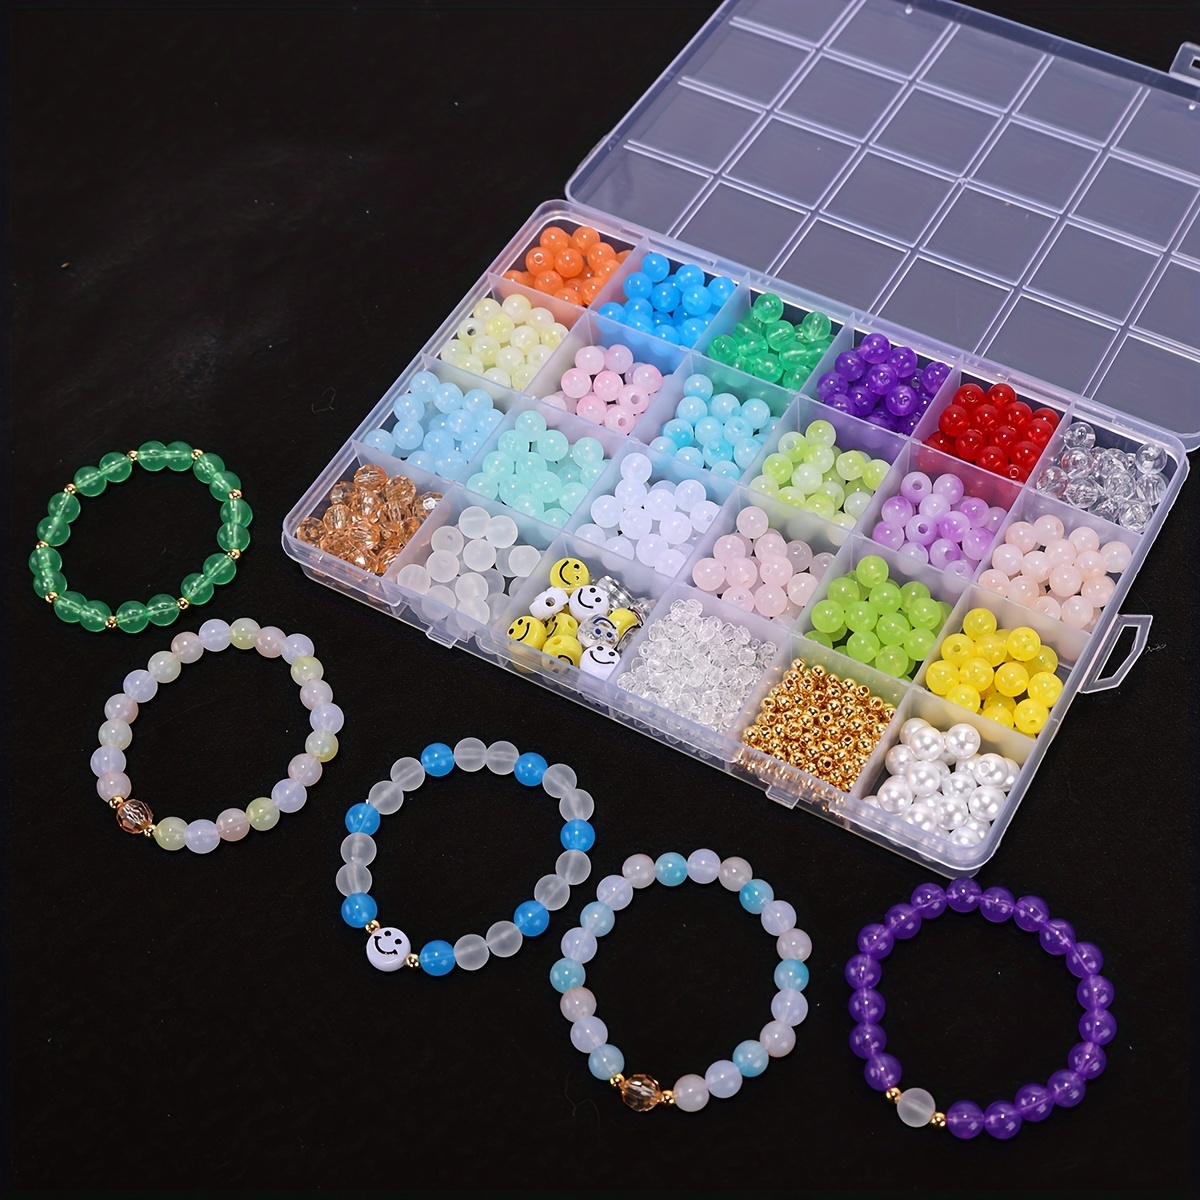  LFLIUN Bracelet Making Kit Glass Beads for Jewelry Making, 24  Color 8mm DIY Crystal Beads Bracelet Making Kit Chakra Beads, Round Stone  Beads Never Fade Suitable for Beginners Girls Birthday Gift